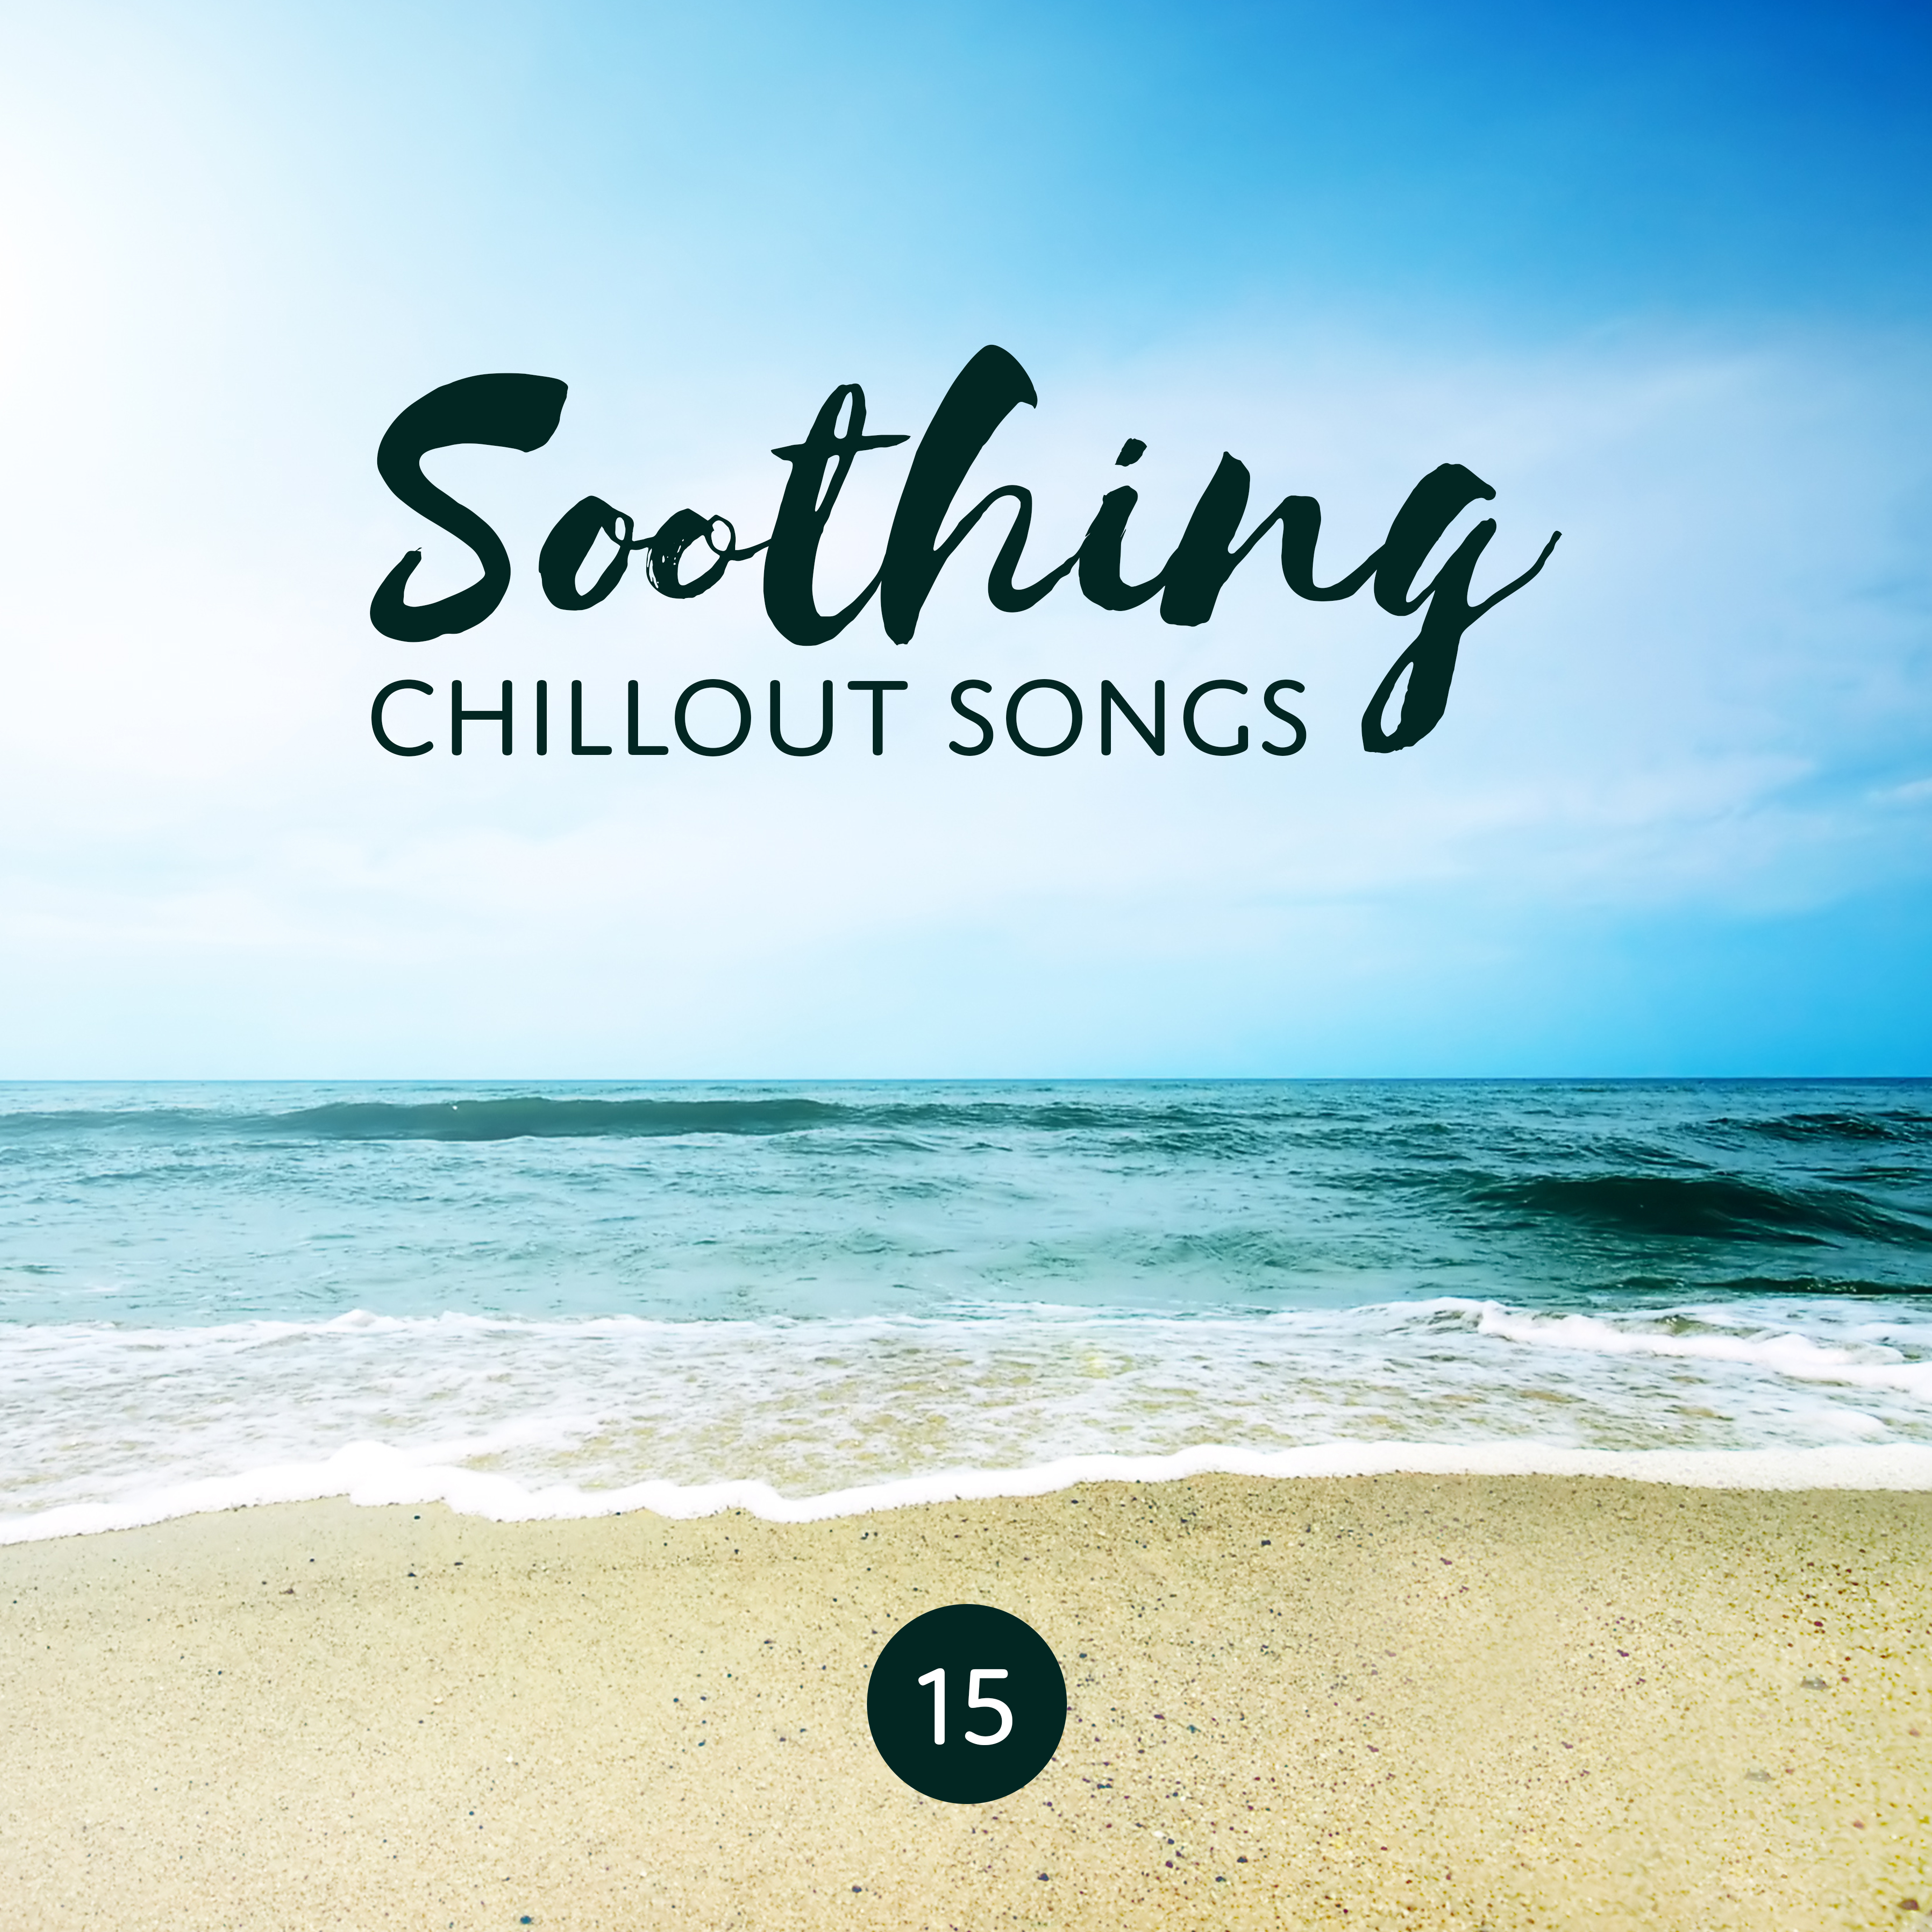 15 Soothing Chillout Songs